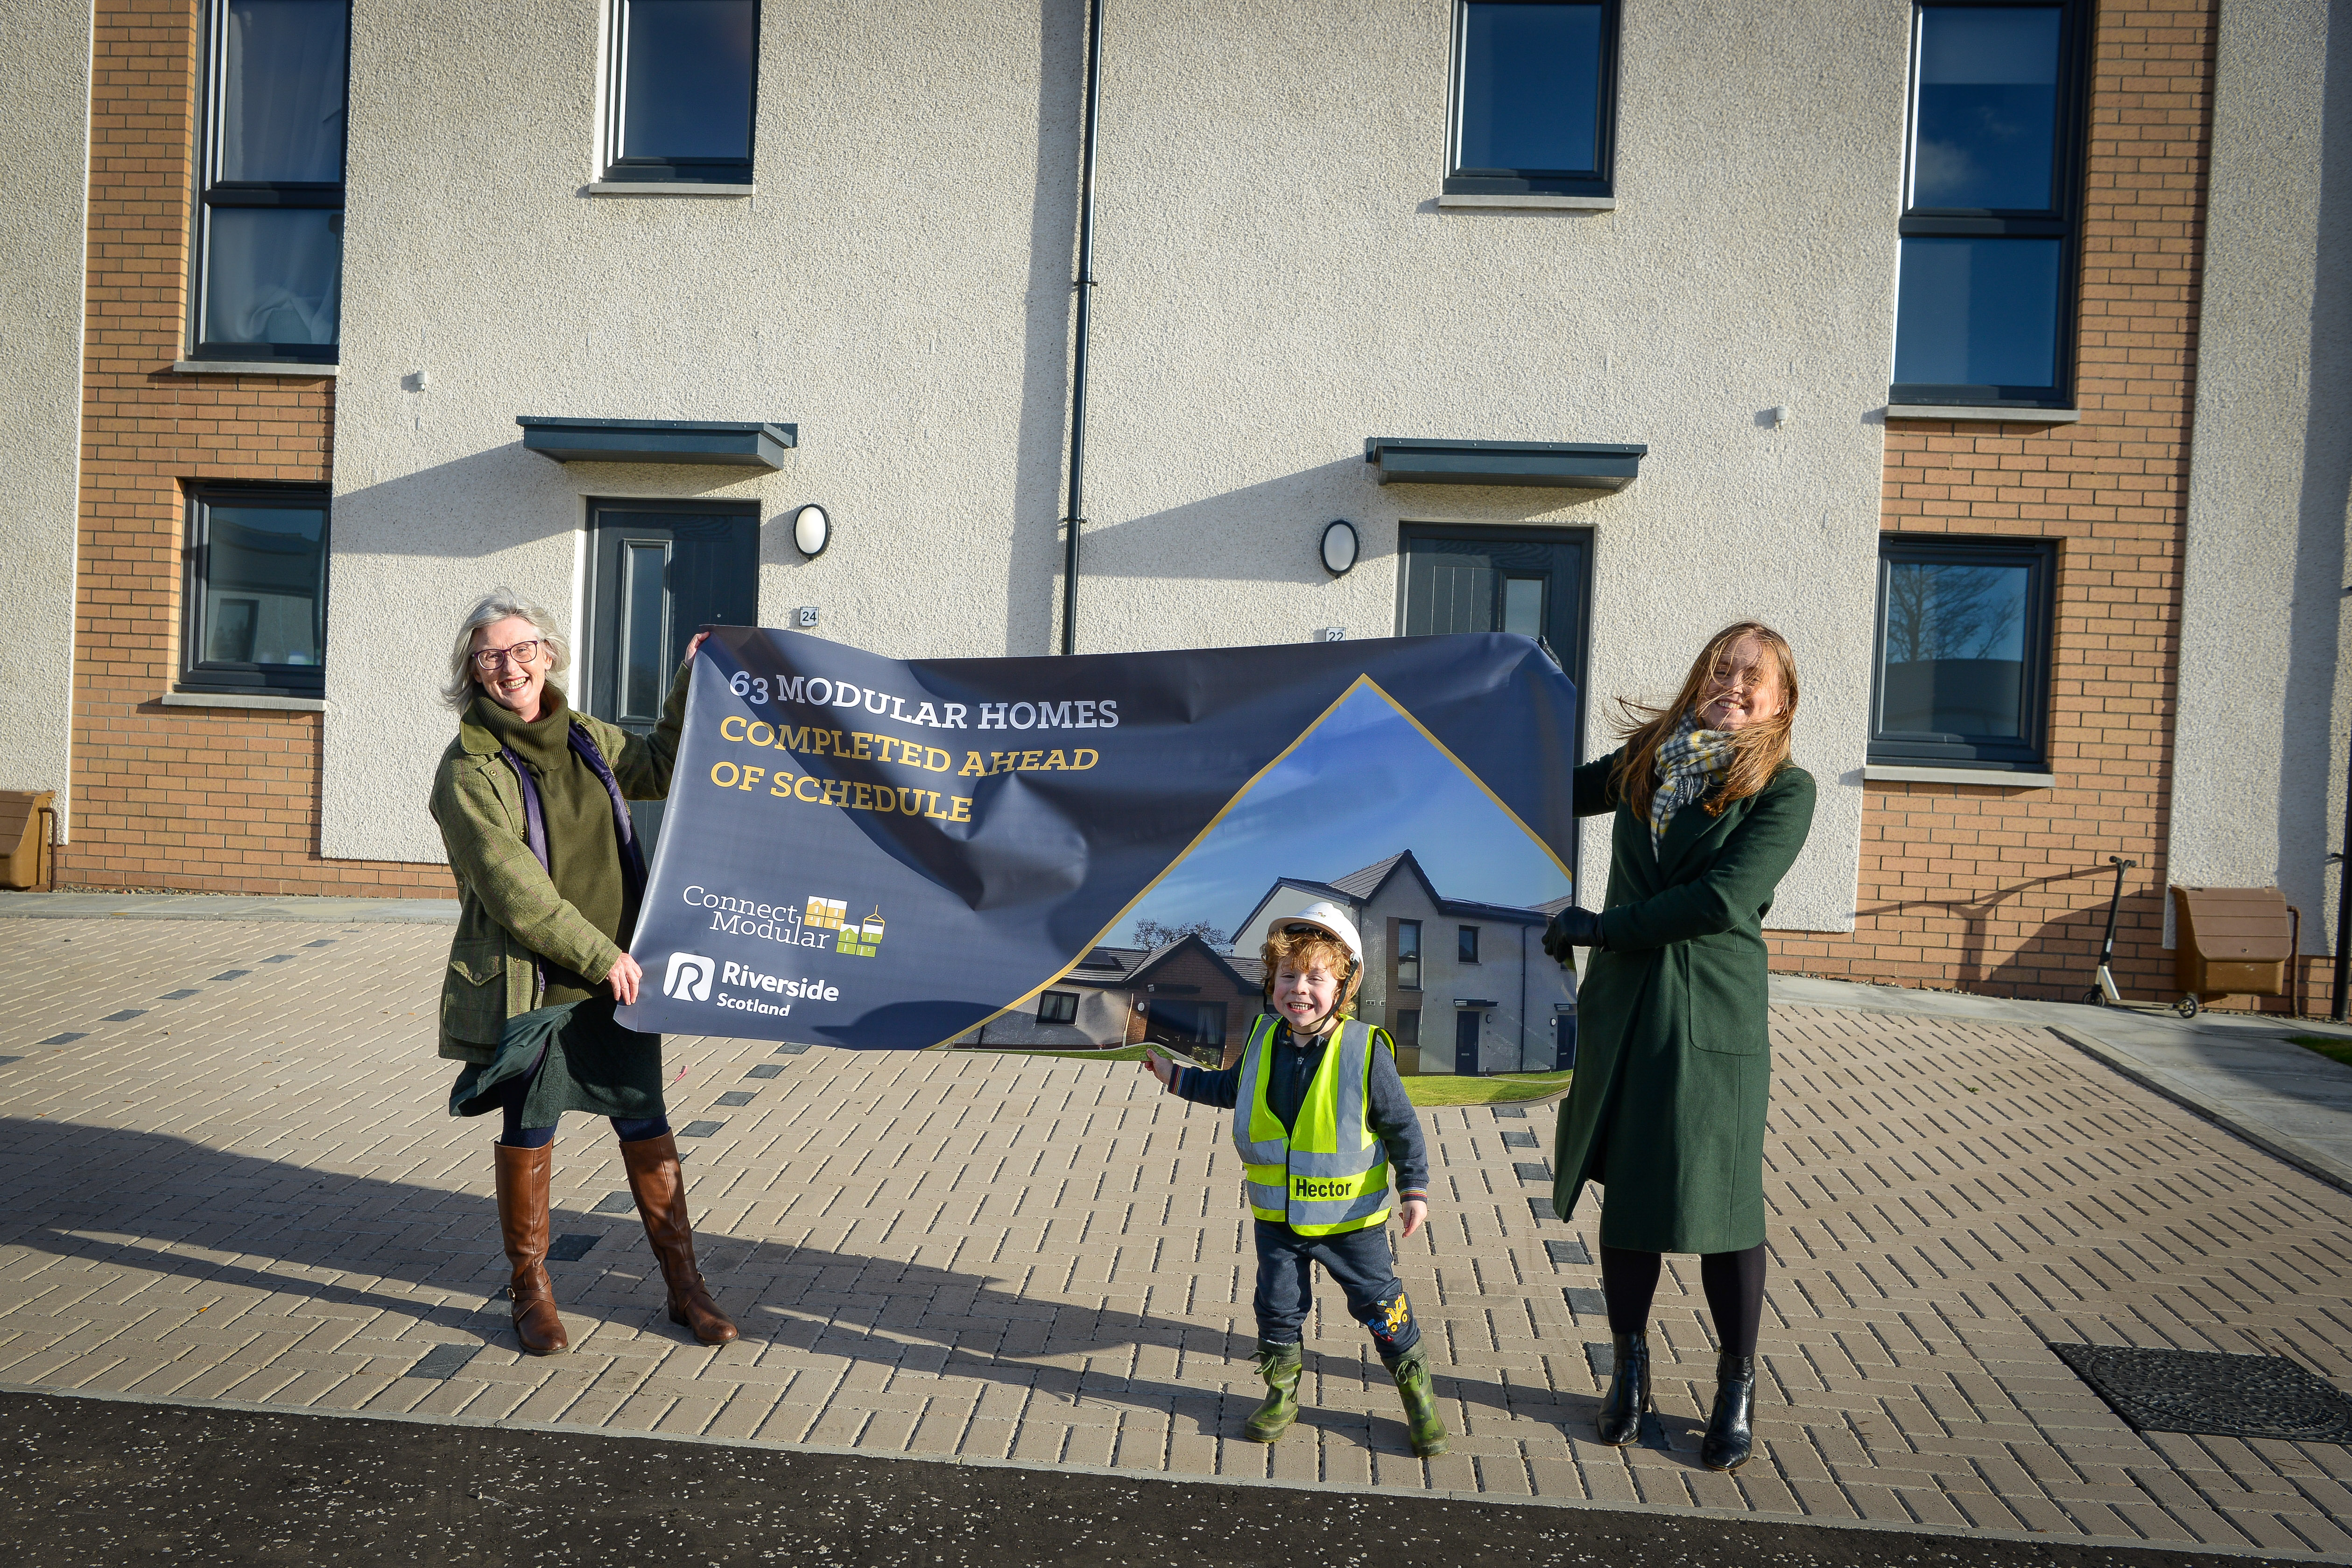 Scotland's first large scale modular housing development is completed